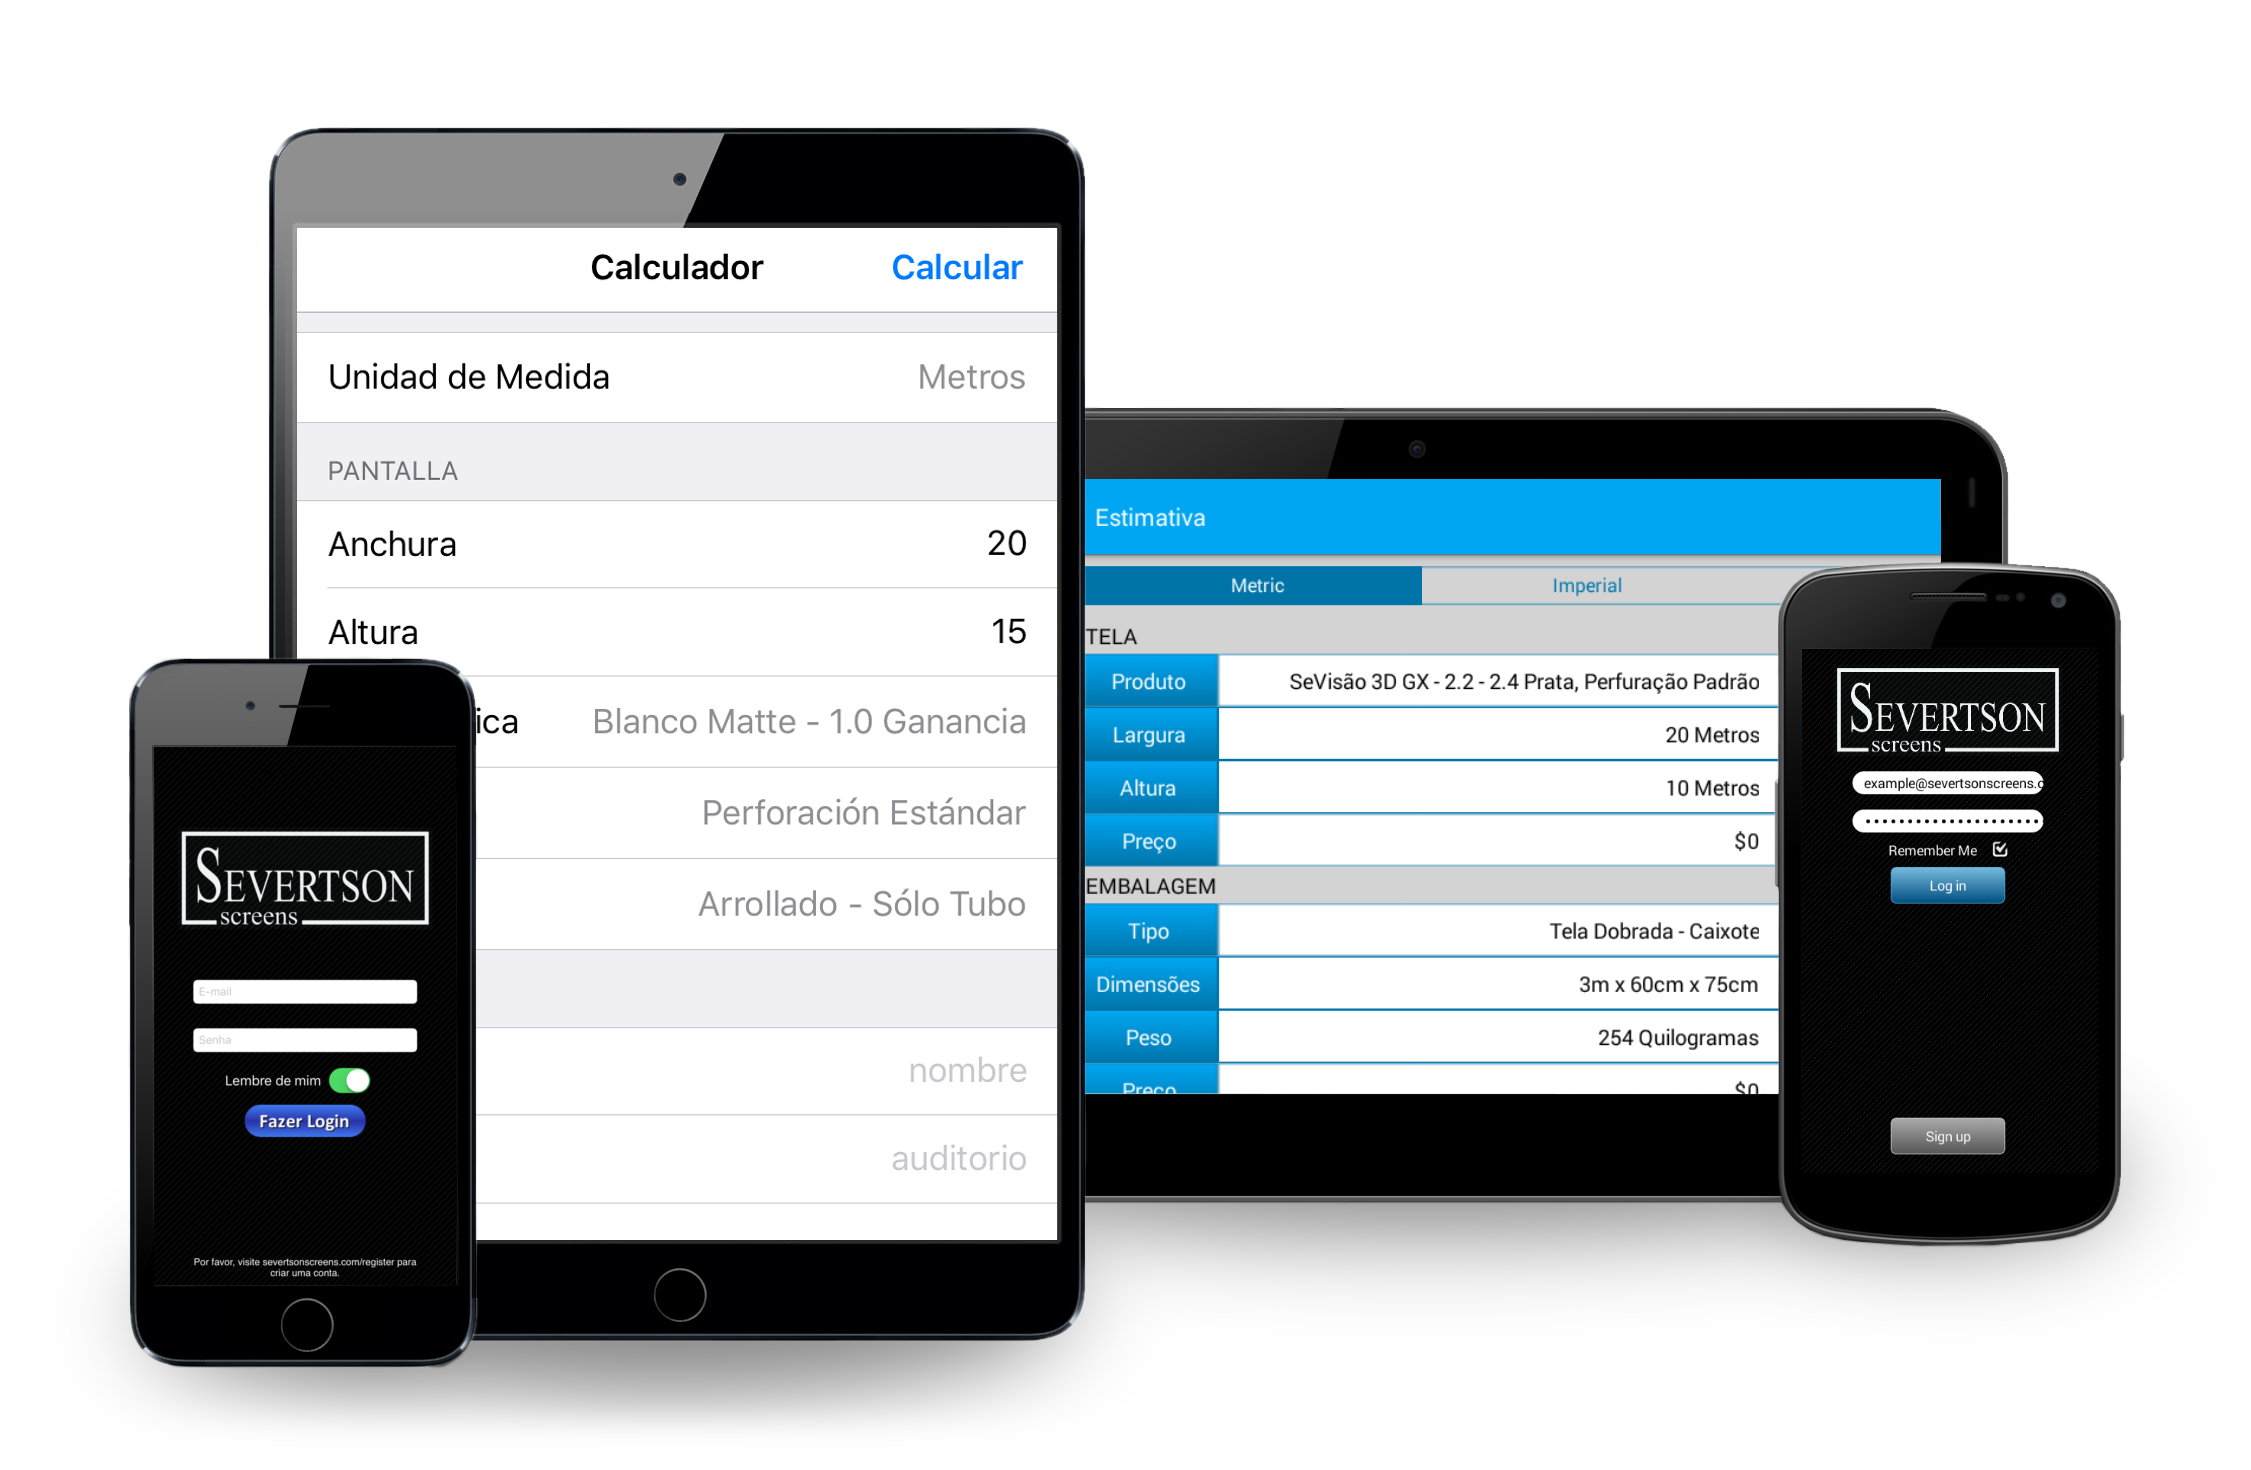 Introducing Severtson Screens' Price Estimator, now in Spanish and Portuguese!